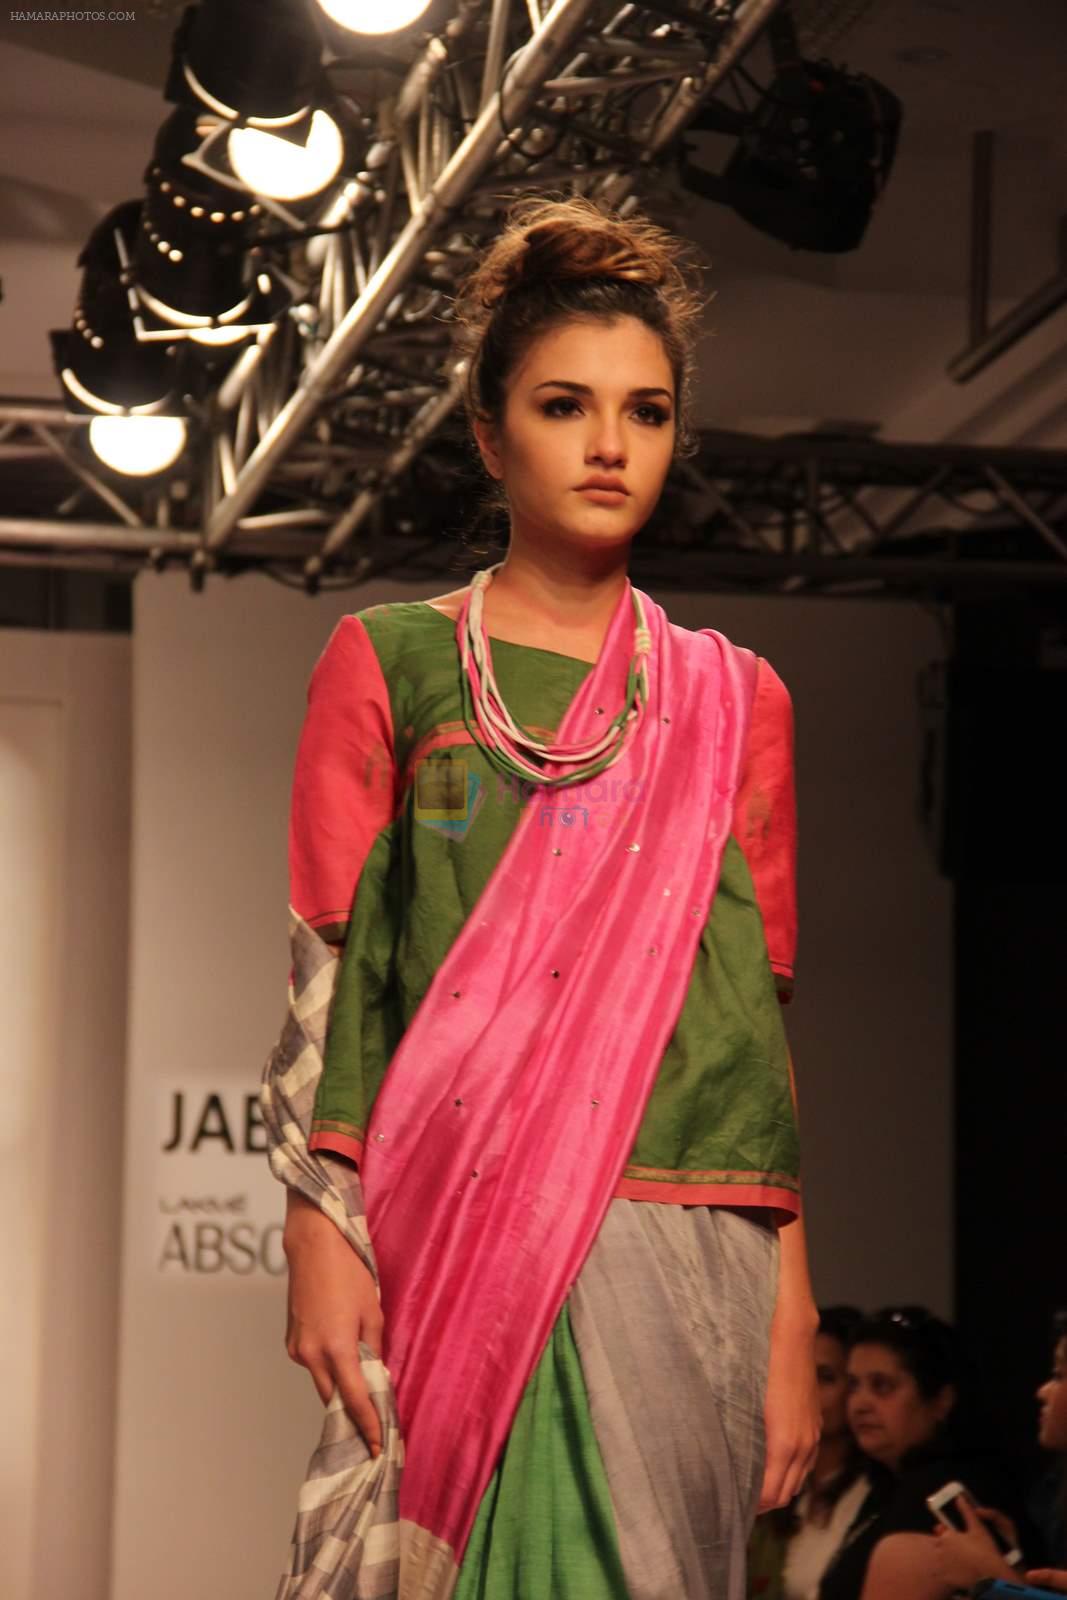 Model walk the ramp for Not Like You Jabong Show at Lakme Fashion Week 2015 Day 2 on 19th March 2015